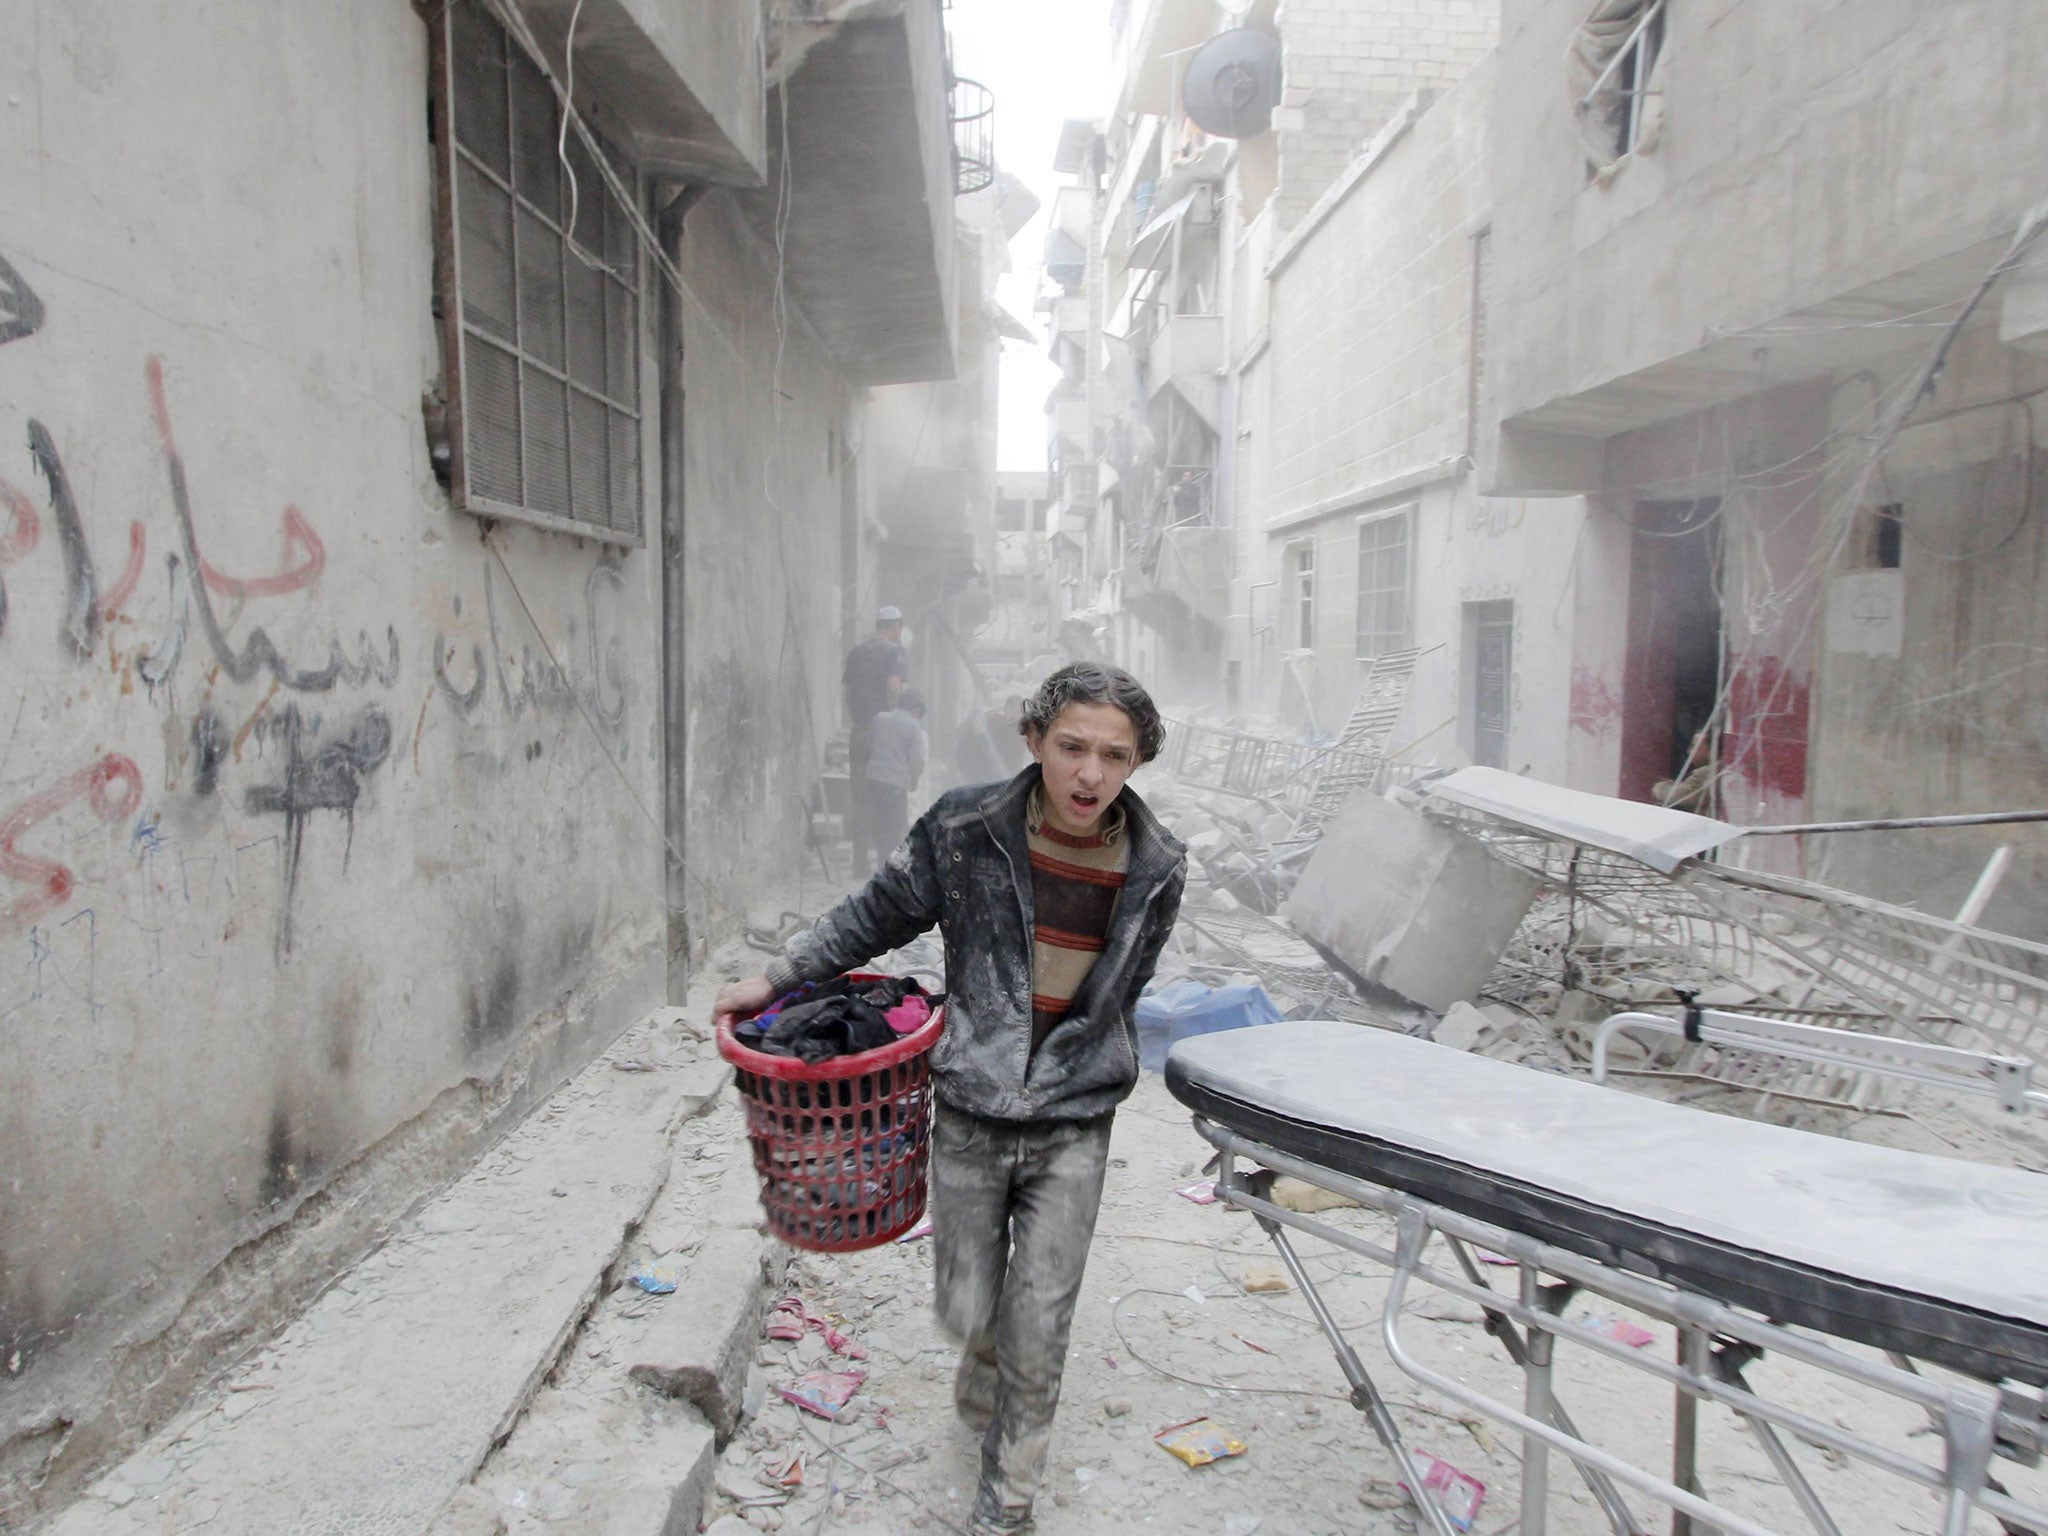 A boy carries his belongings at a site hit by what activists said was a barrel bomb dropped by forces loyal to Syria's President Bashar al-Assad in Aleppo's al-Fardous district